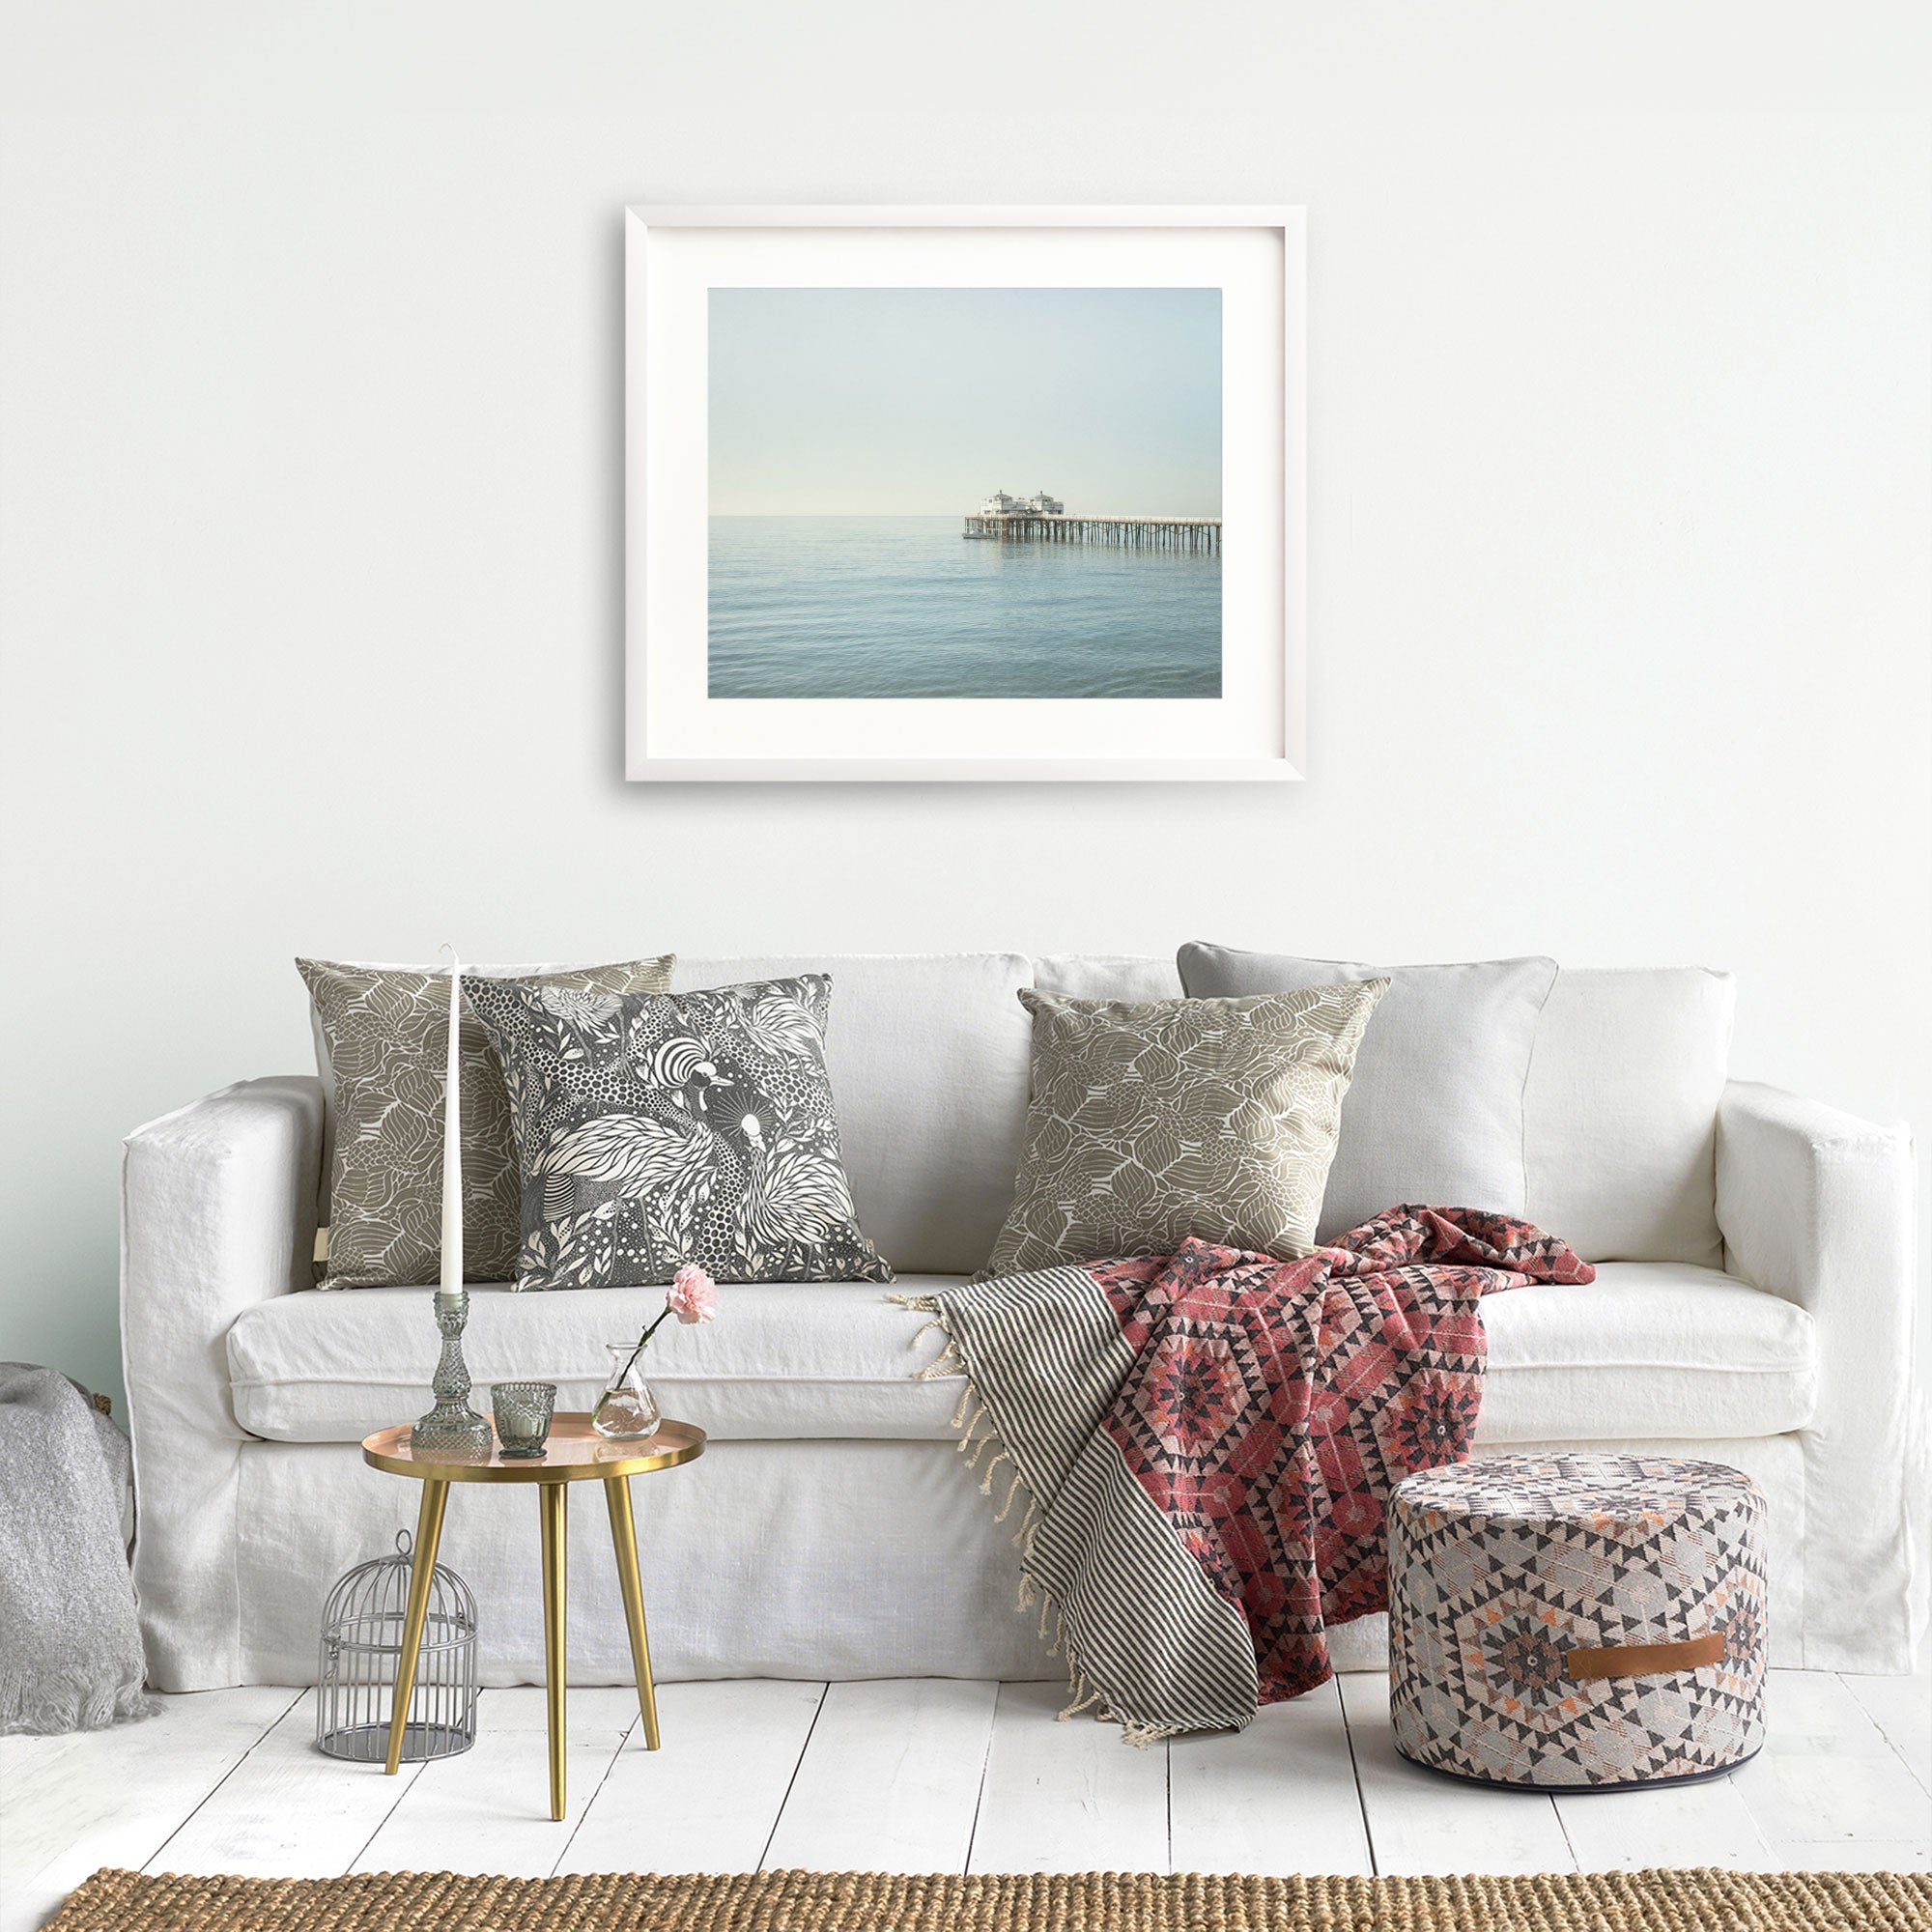 A cozy living room with a white sofa filled with decorative pillows, a red throw blanket, and a framed picture of Offley Green&#39;s Coastal Print of Malibu Pier in California &#39;All Calm in Malibu&#39; above it. A small table with a book and a flower.